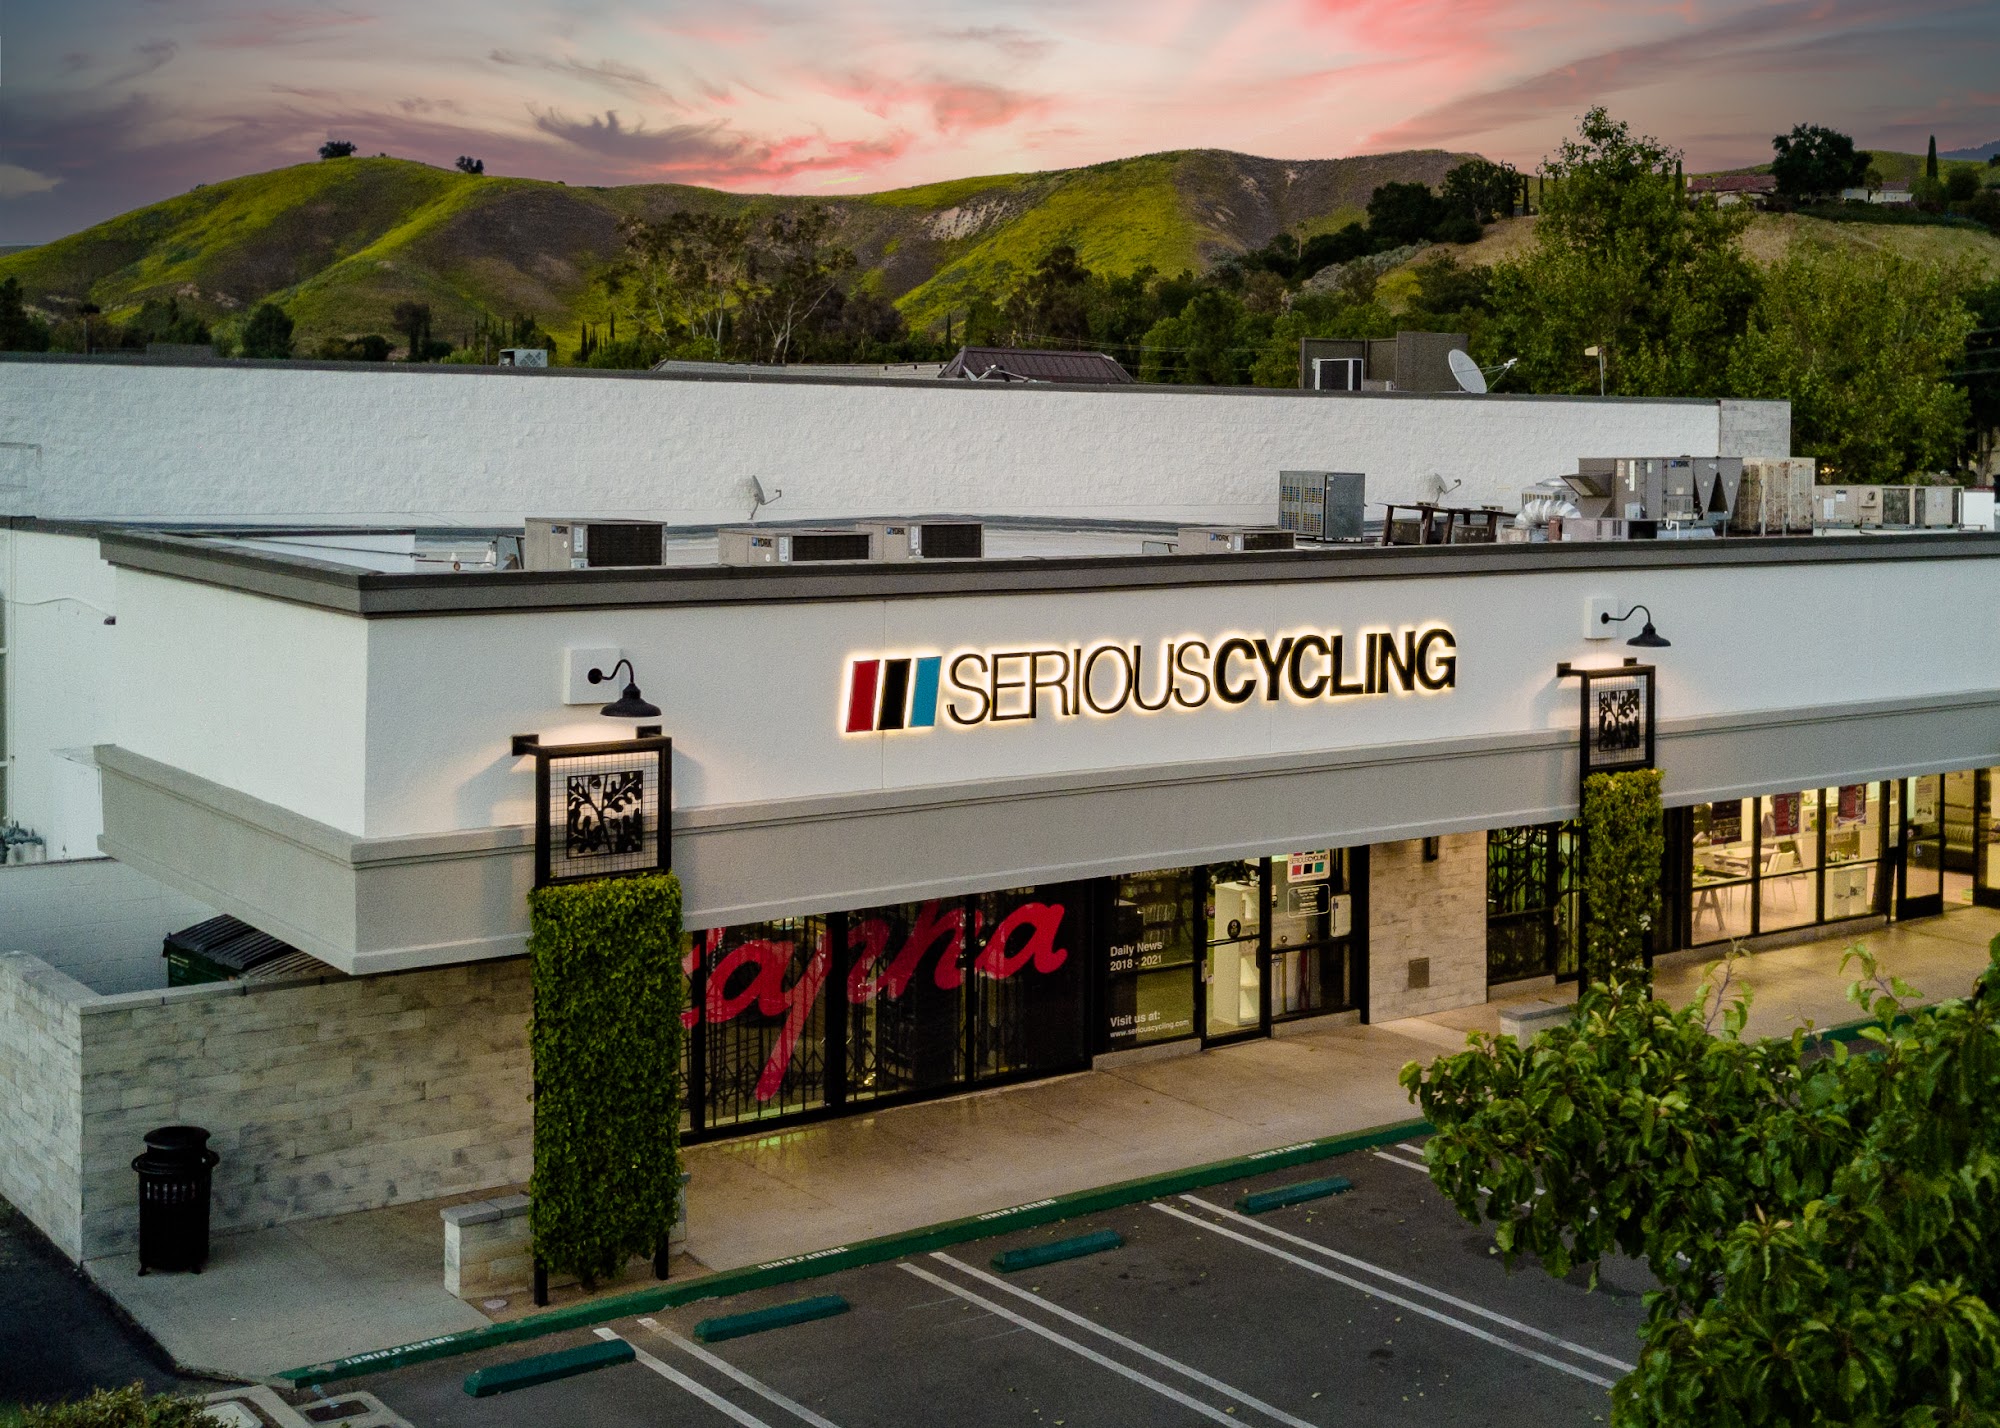 Serious Cycling in Agoura Hills